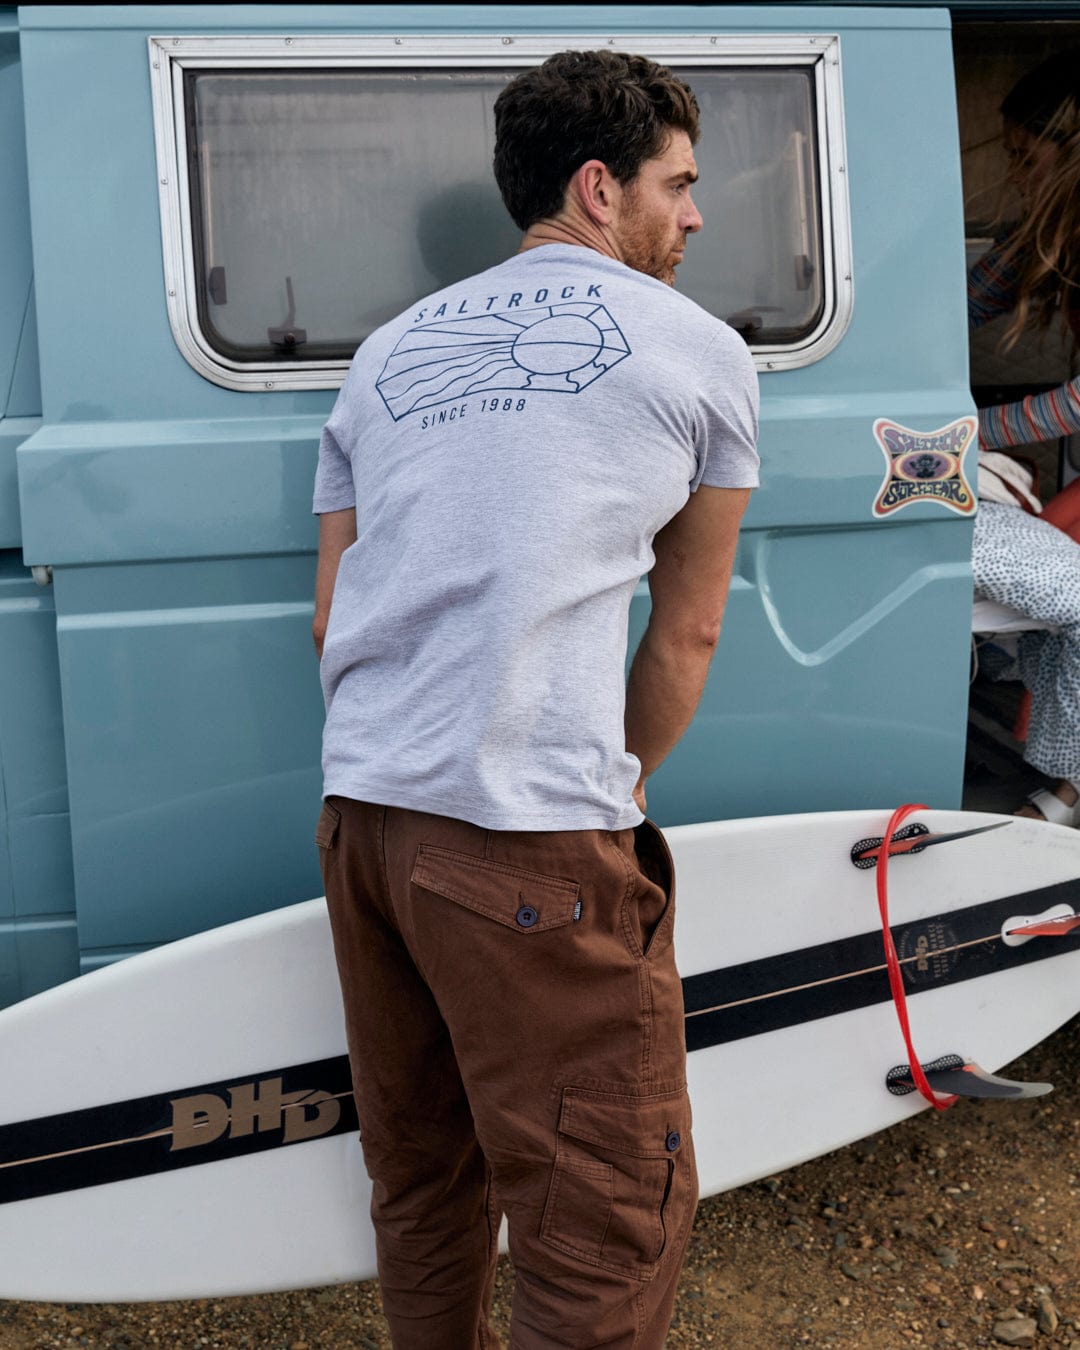 A man with a Saltrock-branded Vantage Outline - Mens Short Sleeve T-Shirt - Grey Marl in the back of a van.